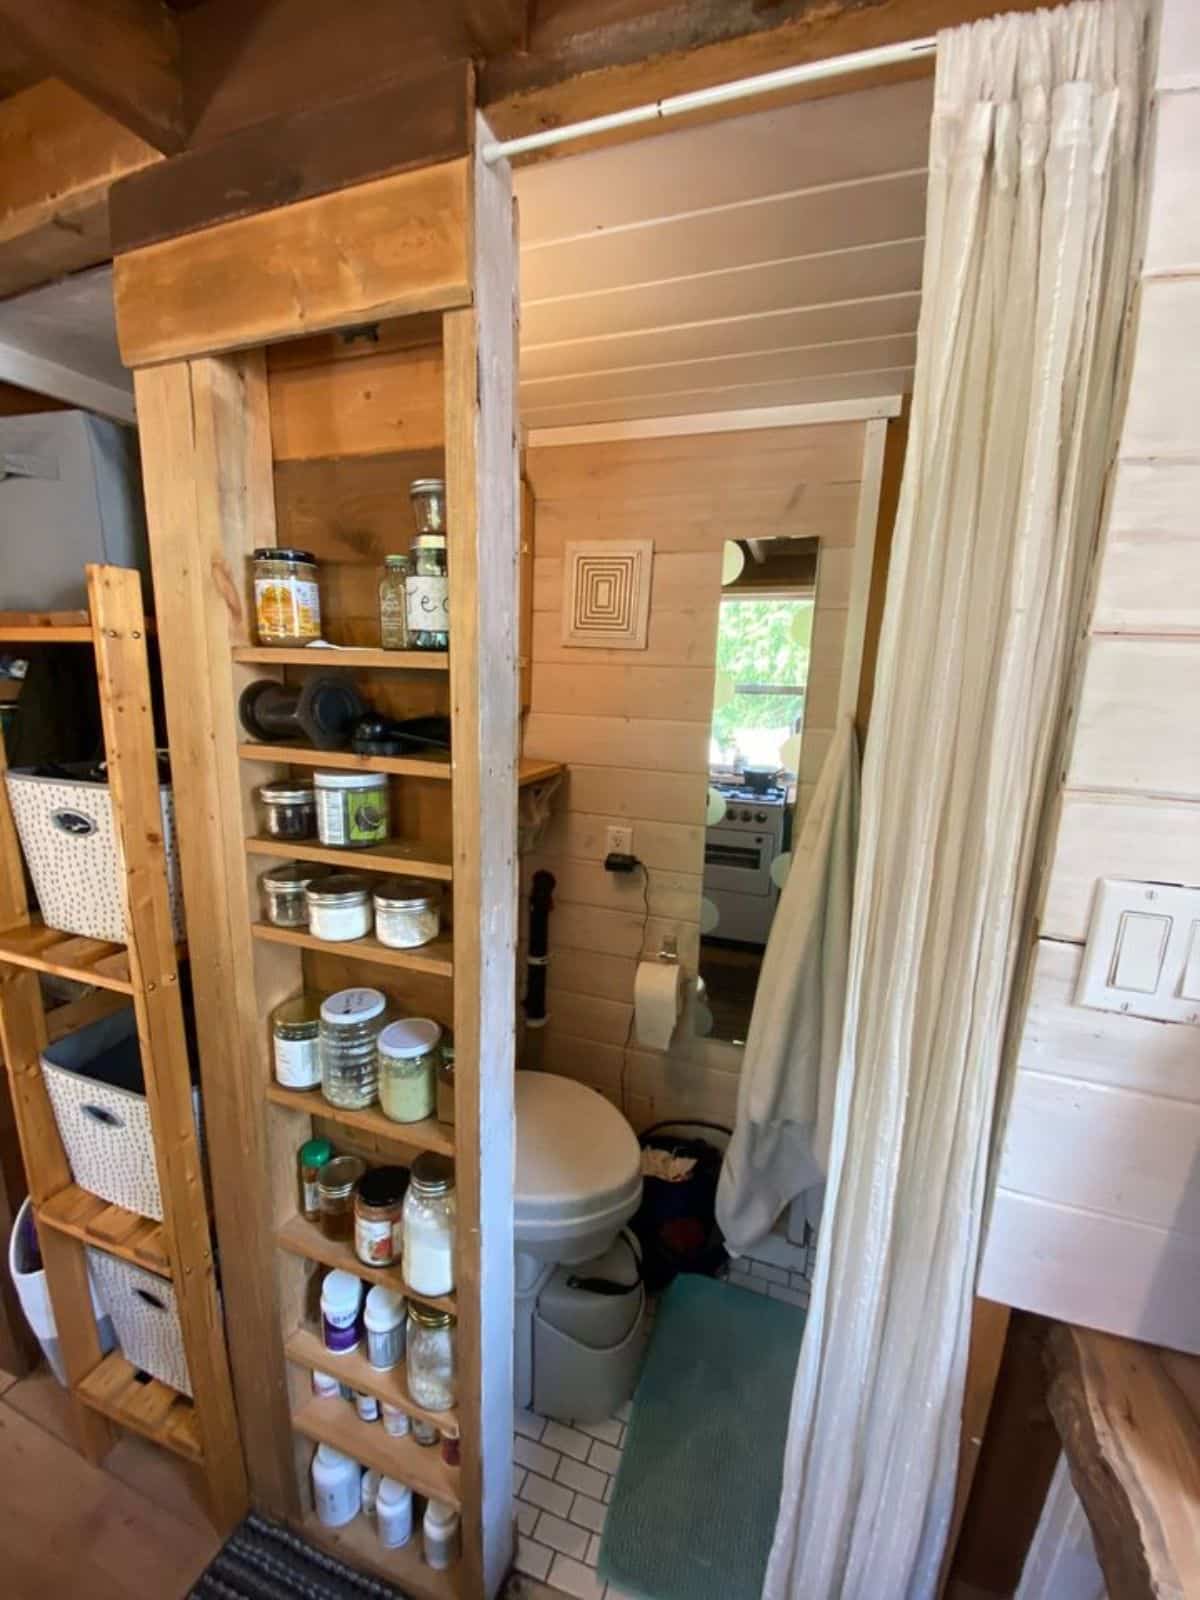 bathroom of 20’ cozy tiny home has all the standard fittings plus pantry storage cabinet outside